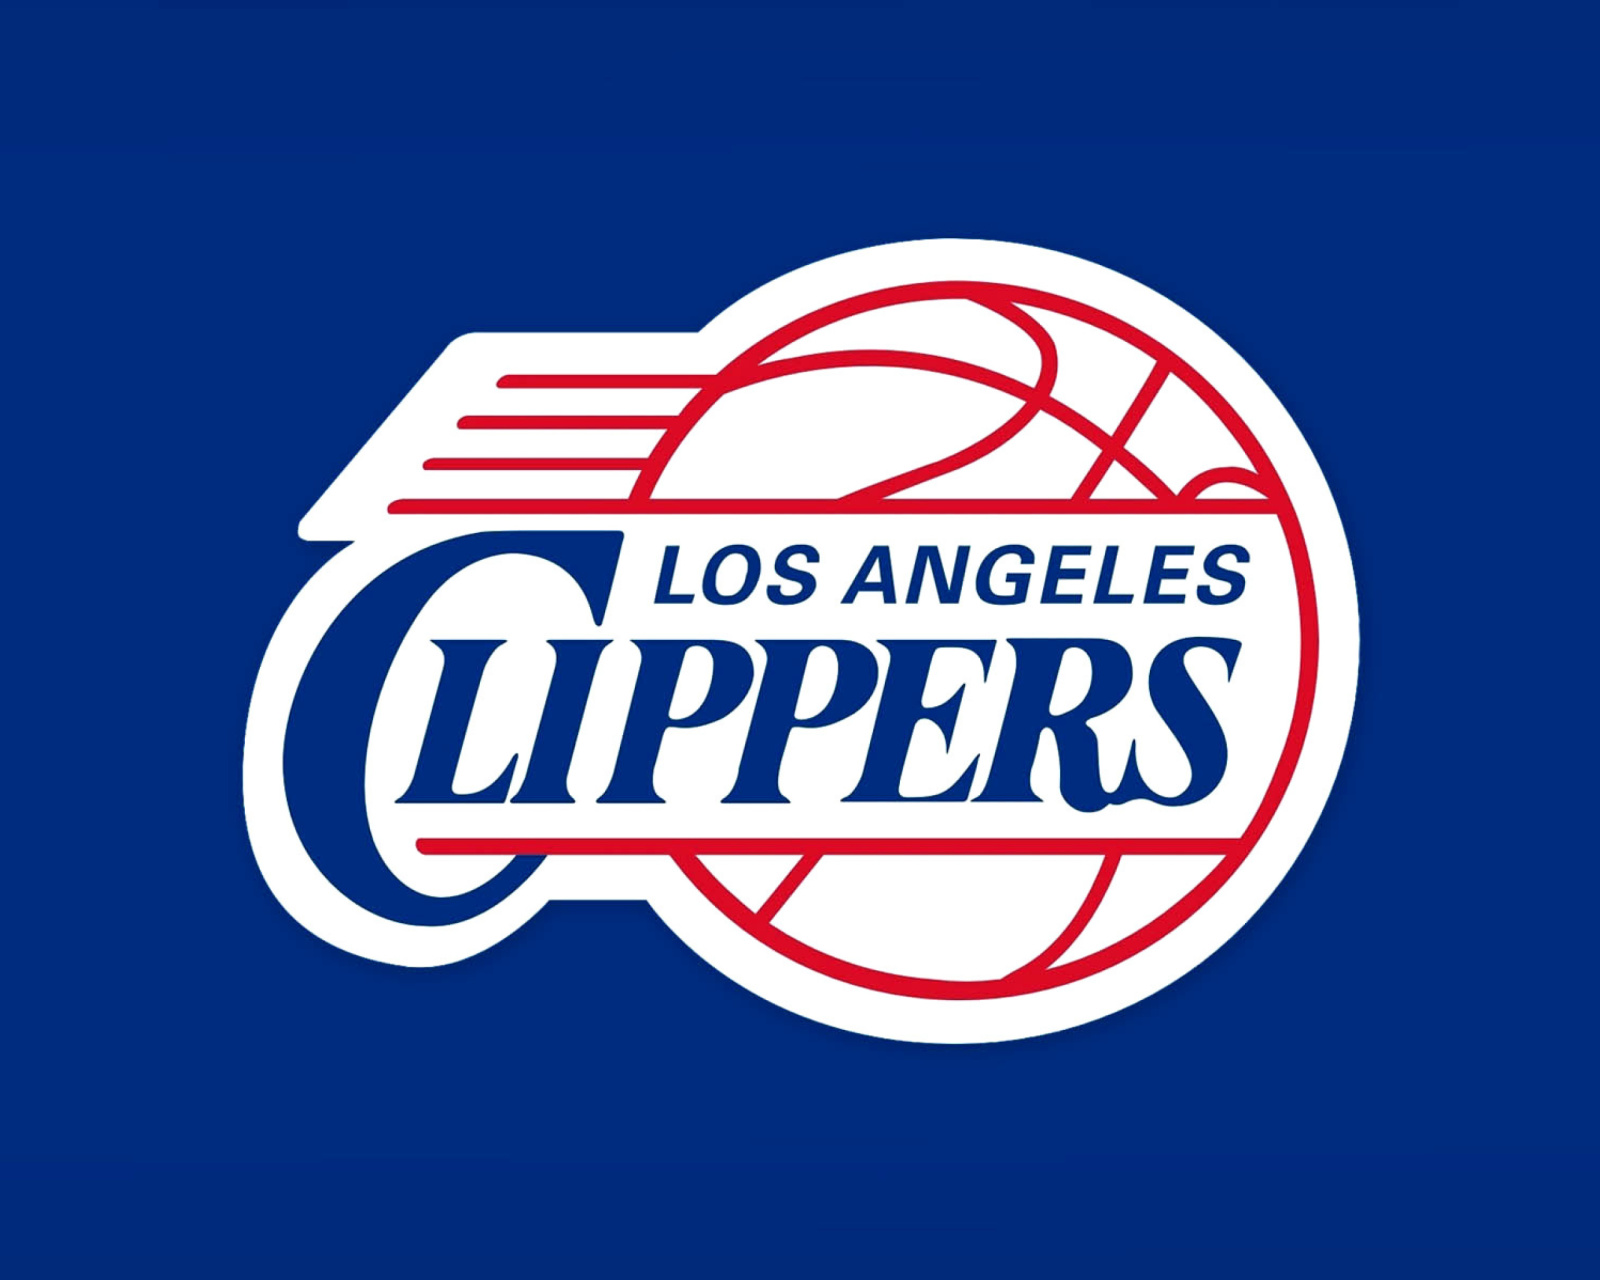 Los Angeles Clippers wallpaper 1600x1280